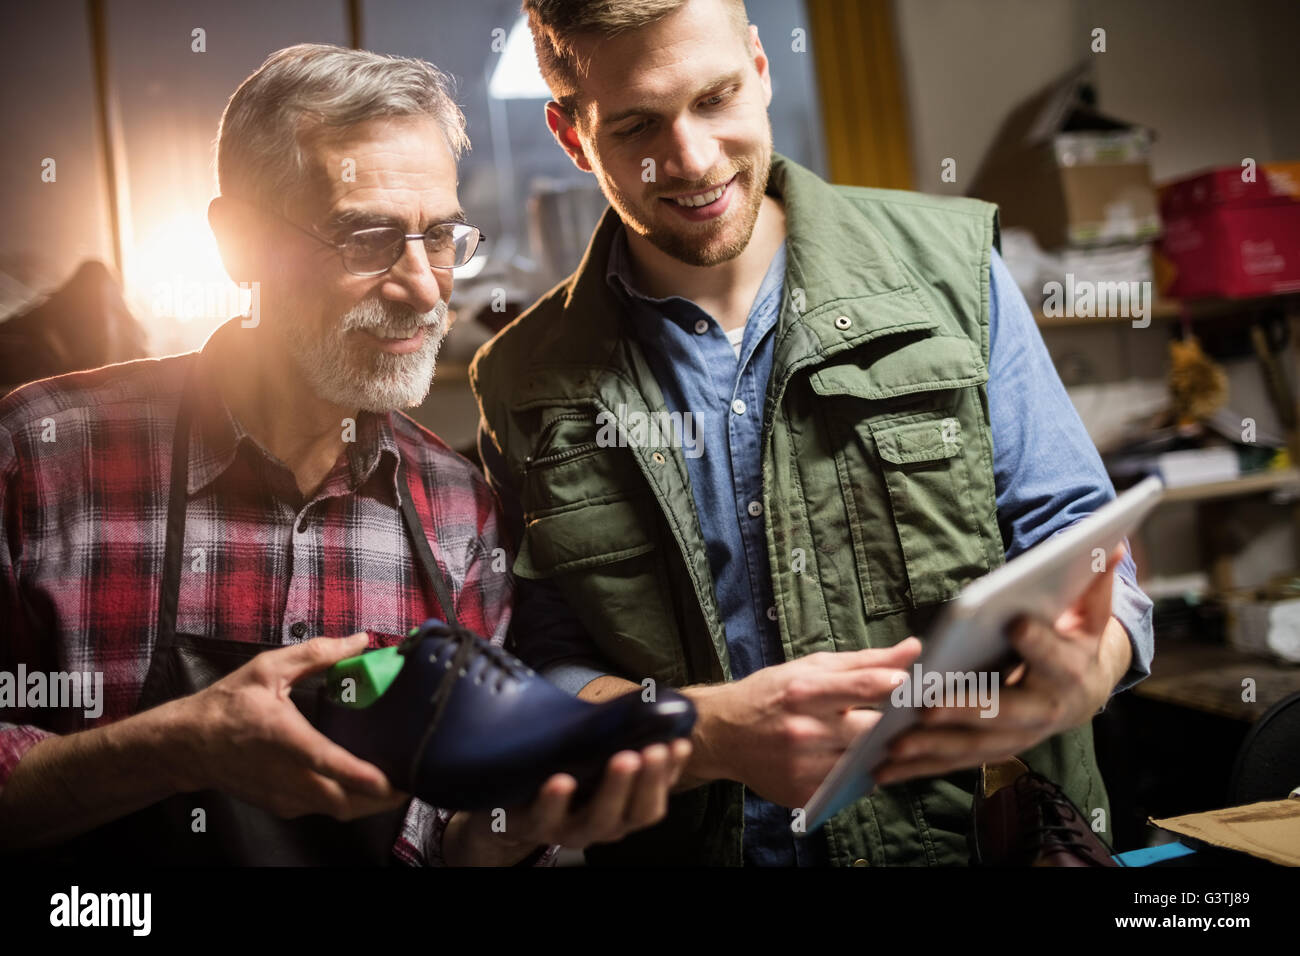 Cobblers smiling and holding a shoe and tablet computer Stock Photo